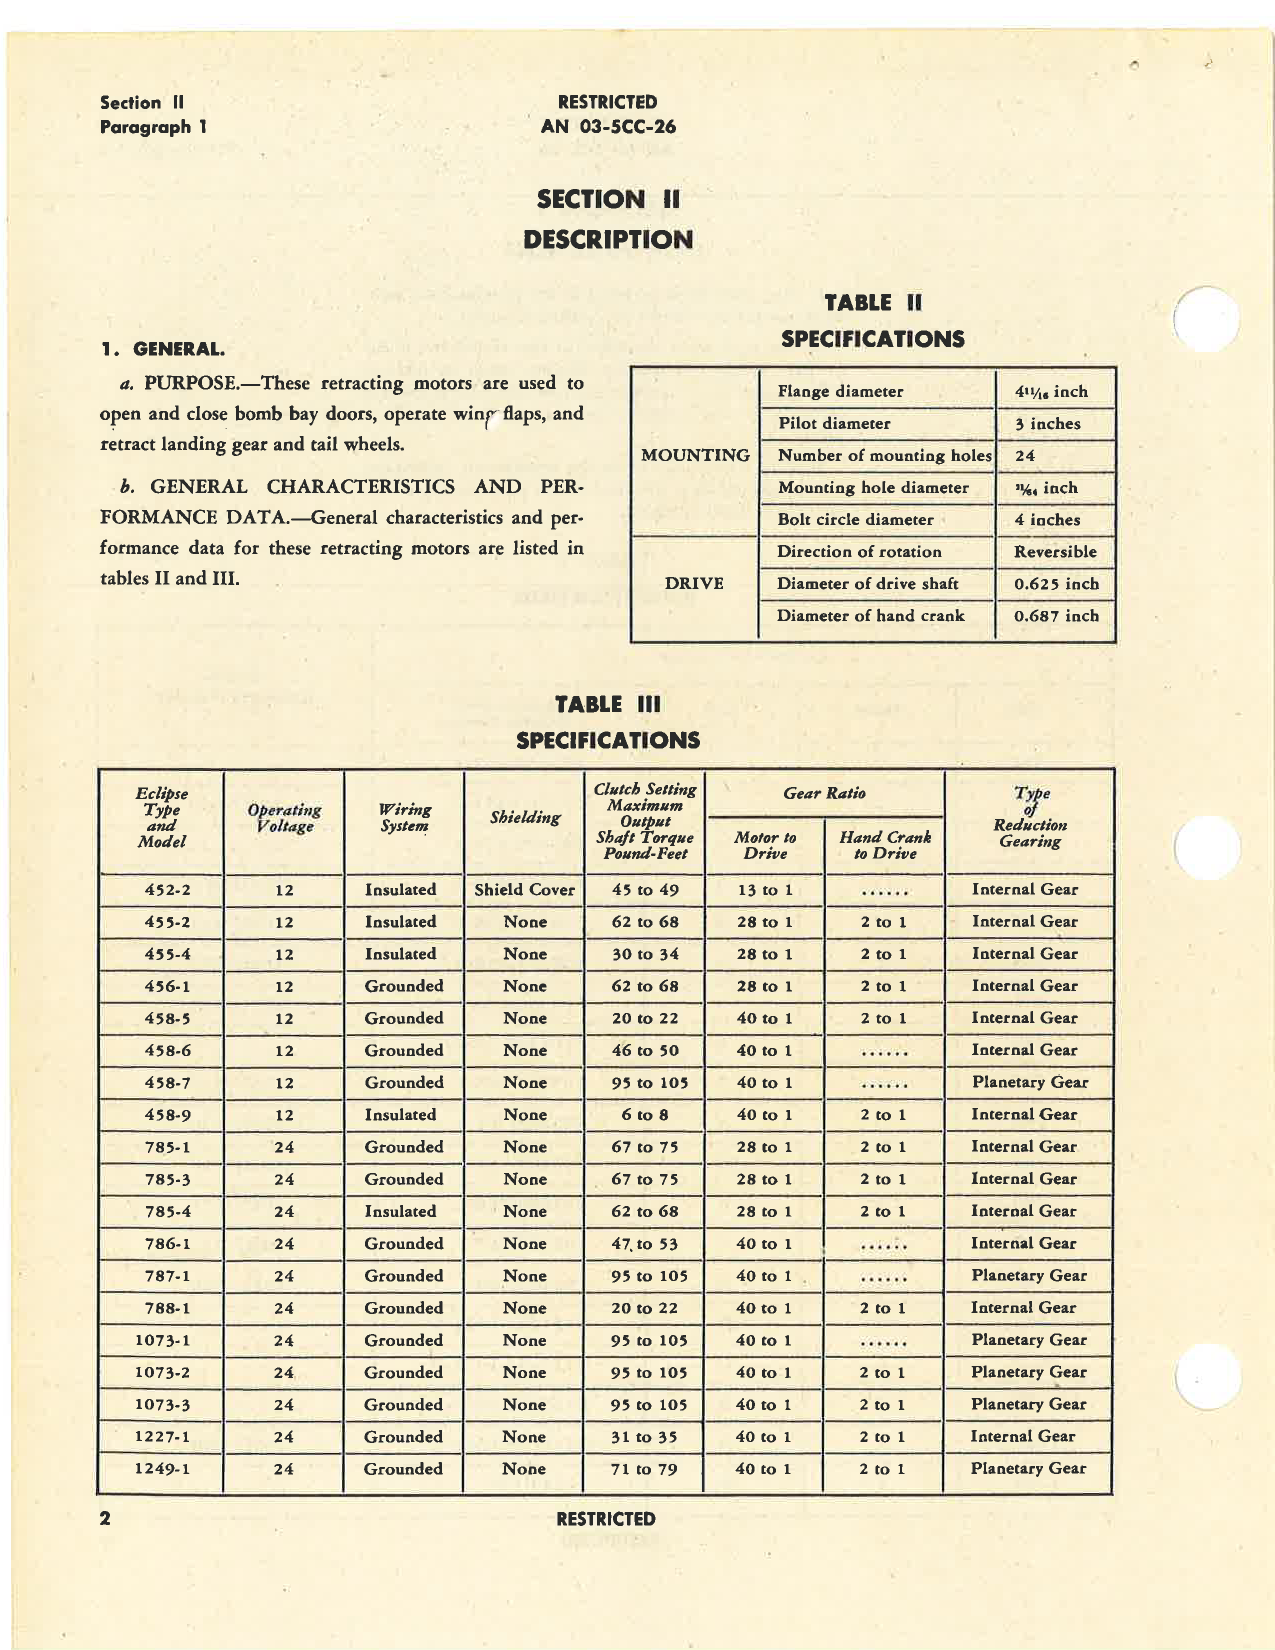 Sample page 8 from AirCorps Library document: Handbook of Instructions with Parts Catalog for Retracting Motors